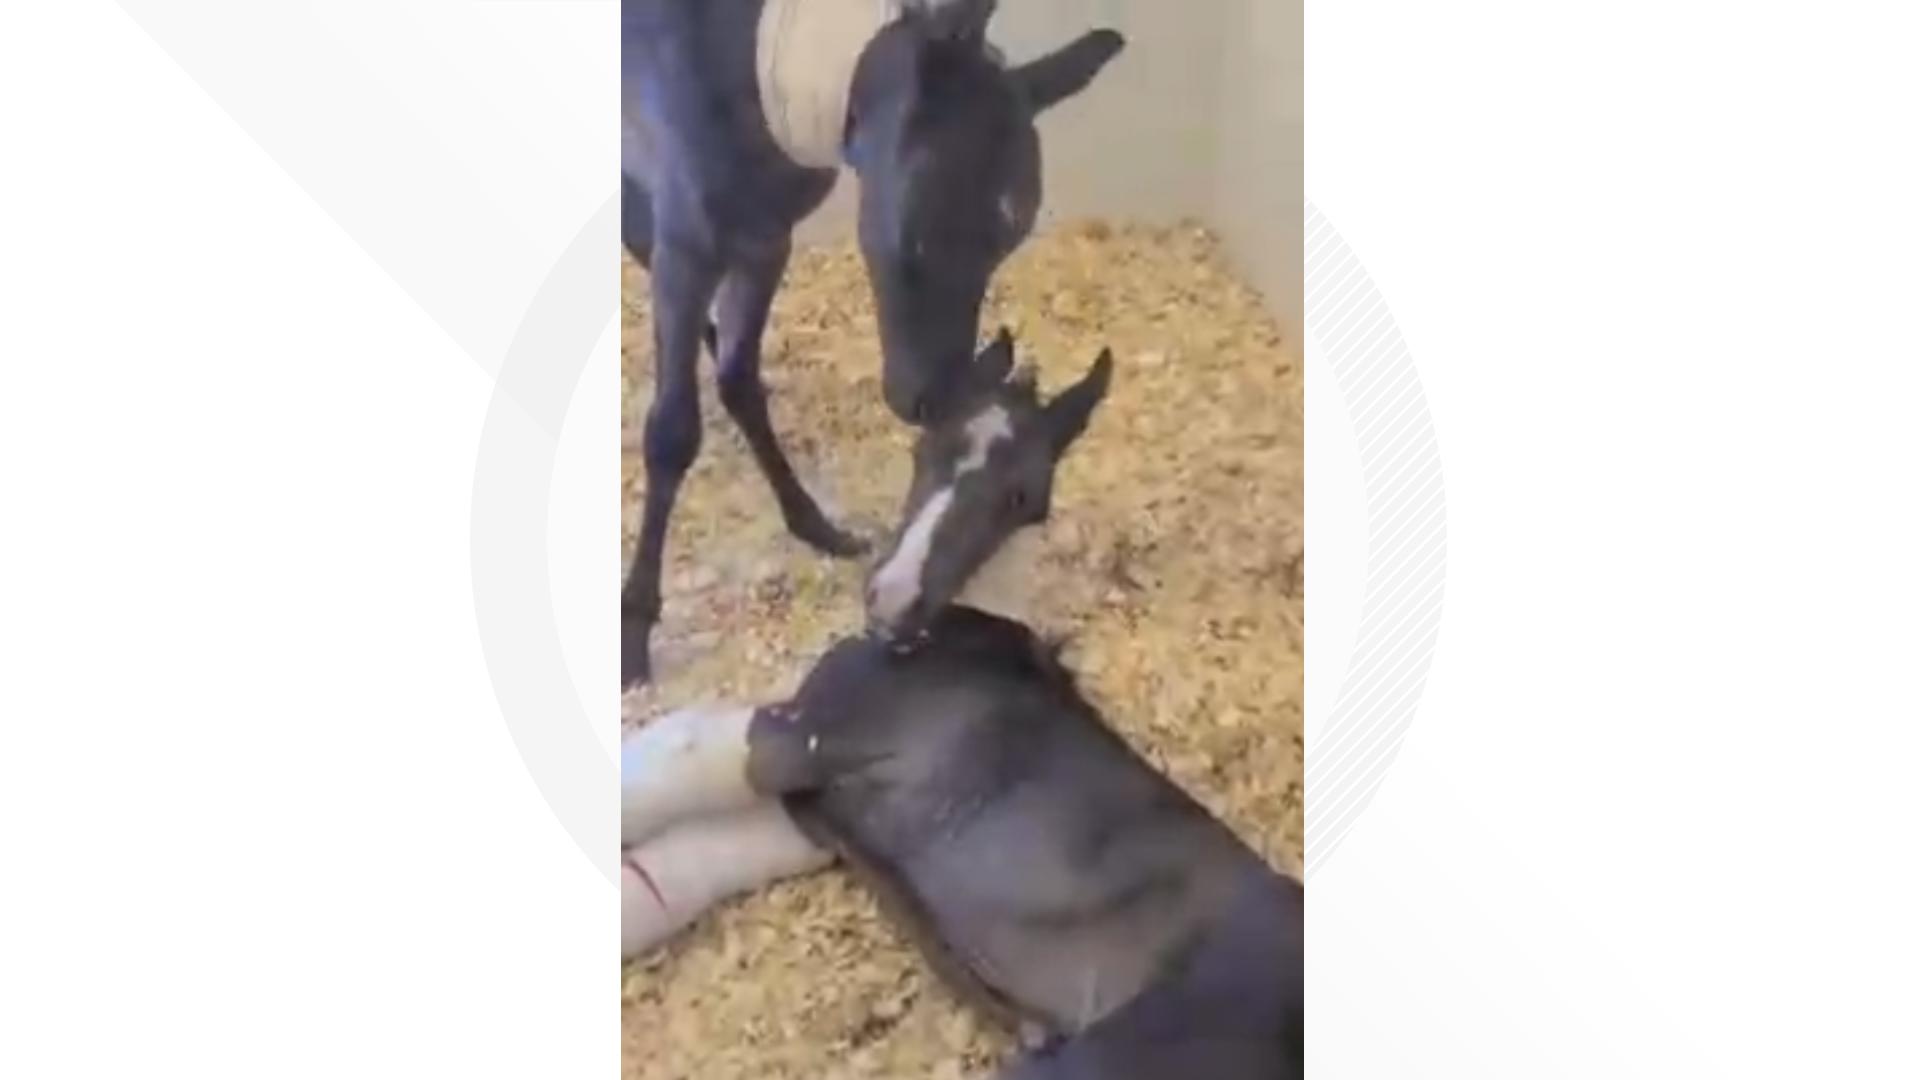 A Blue Roan Mare shocked her owner and the University of Georgia’s Veterinary Hospital staff after giving birth to twins on Monday - a rarity for horses.